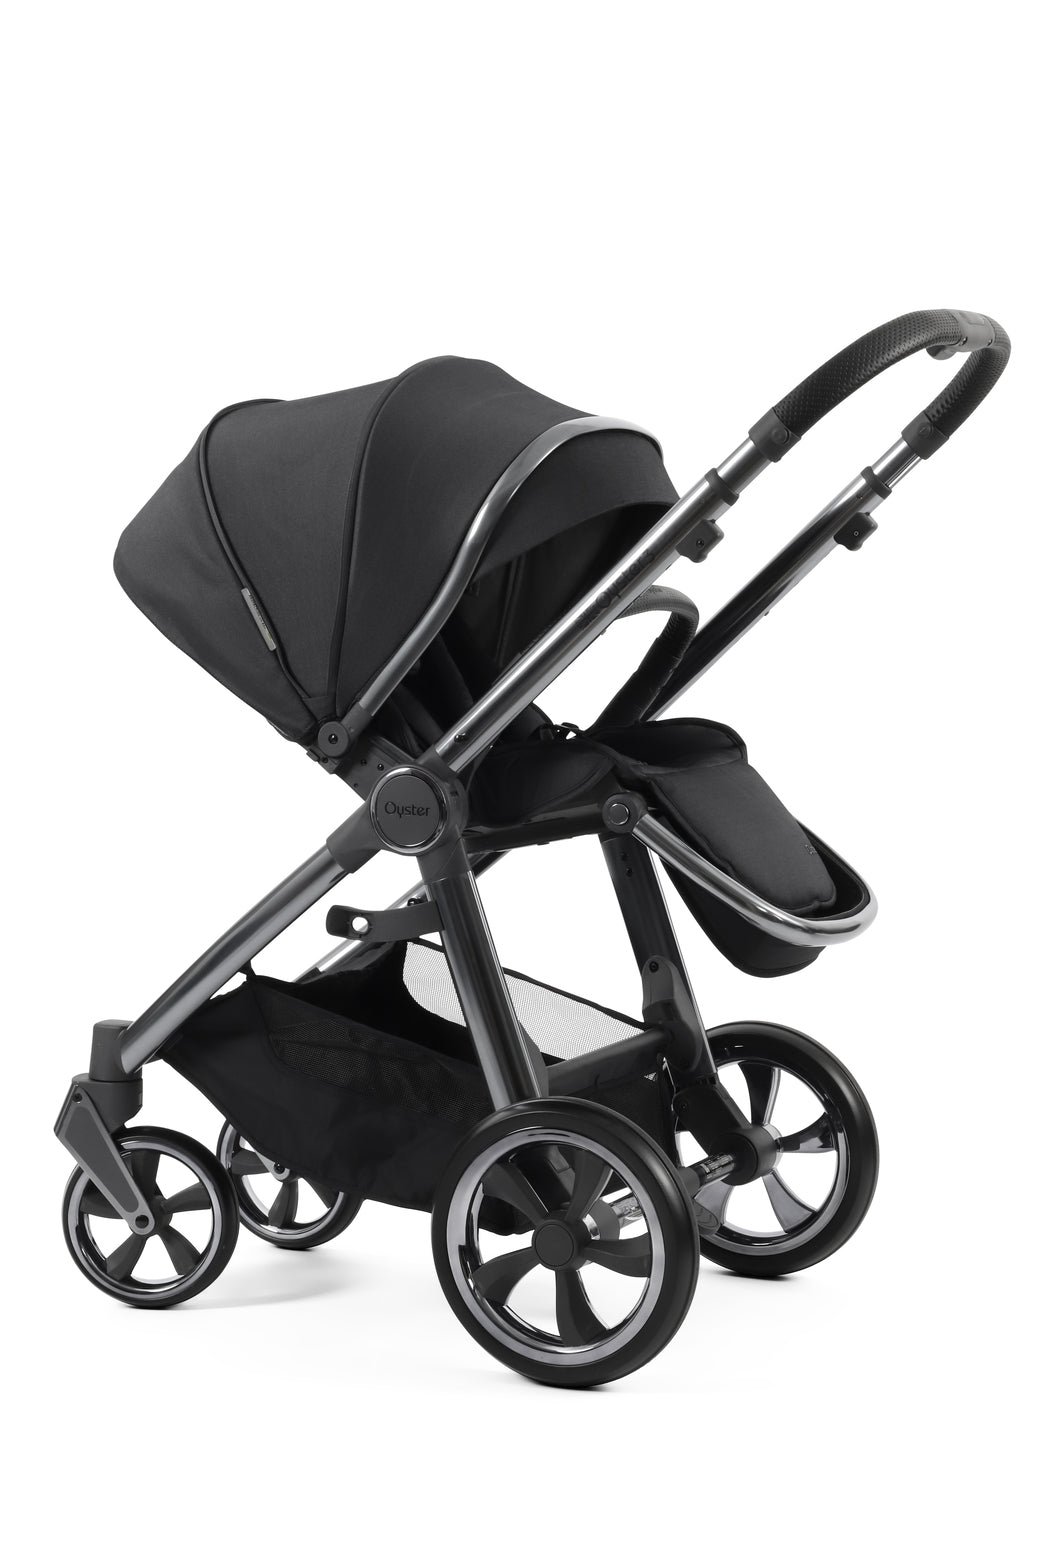 Babystyle Oyster 3 Pushchair + Carrycot - Carbonite - For Your Little One